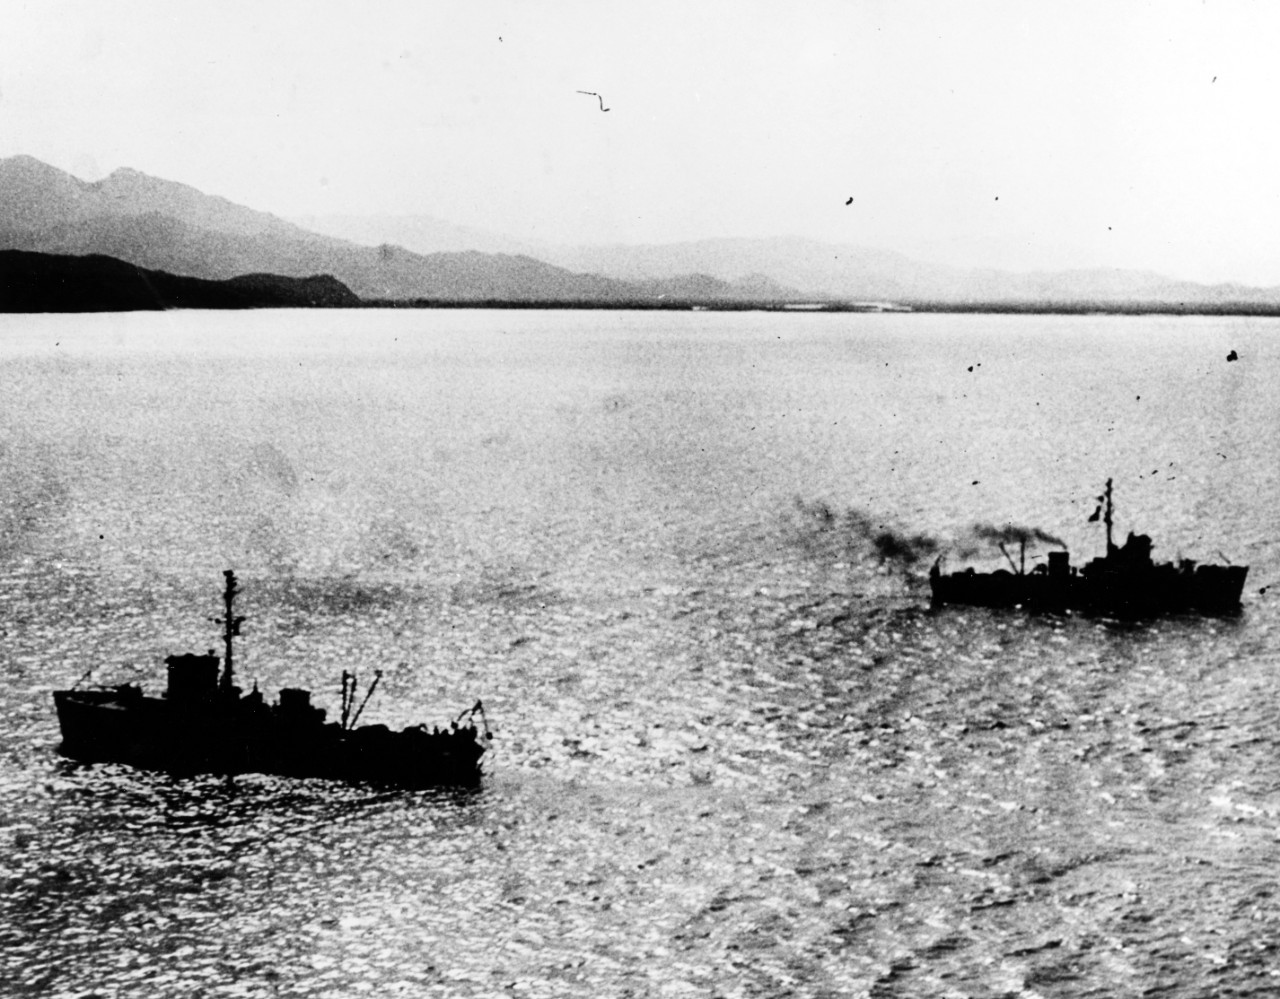 Two U.S. Navy minesweepers (AMS) at work off Wonsan, Korea. The original photo is dated 24 October 1950. Official U.S. Navy Photograph, now in the collections of the National Archives.